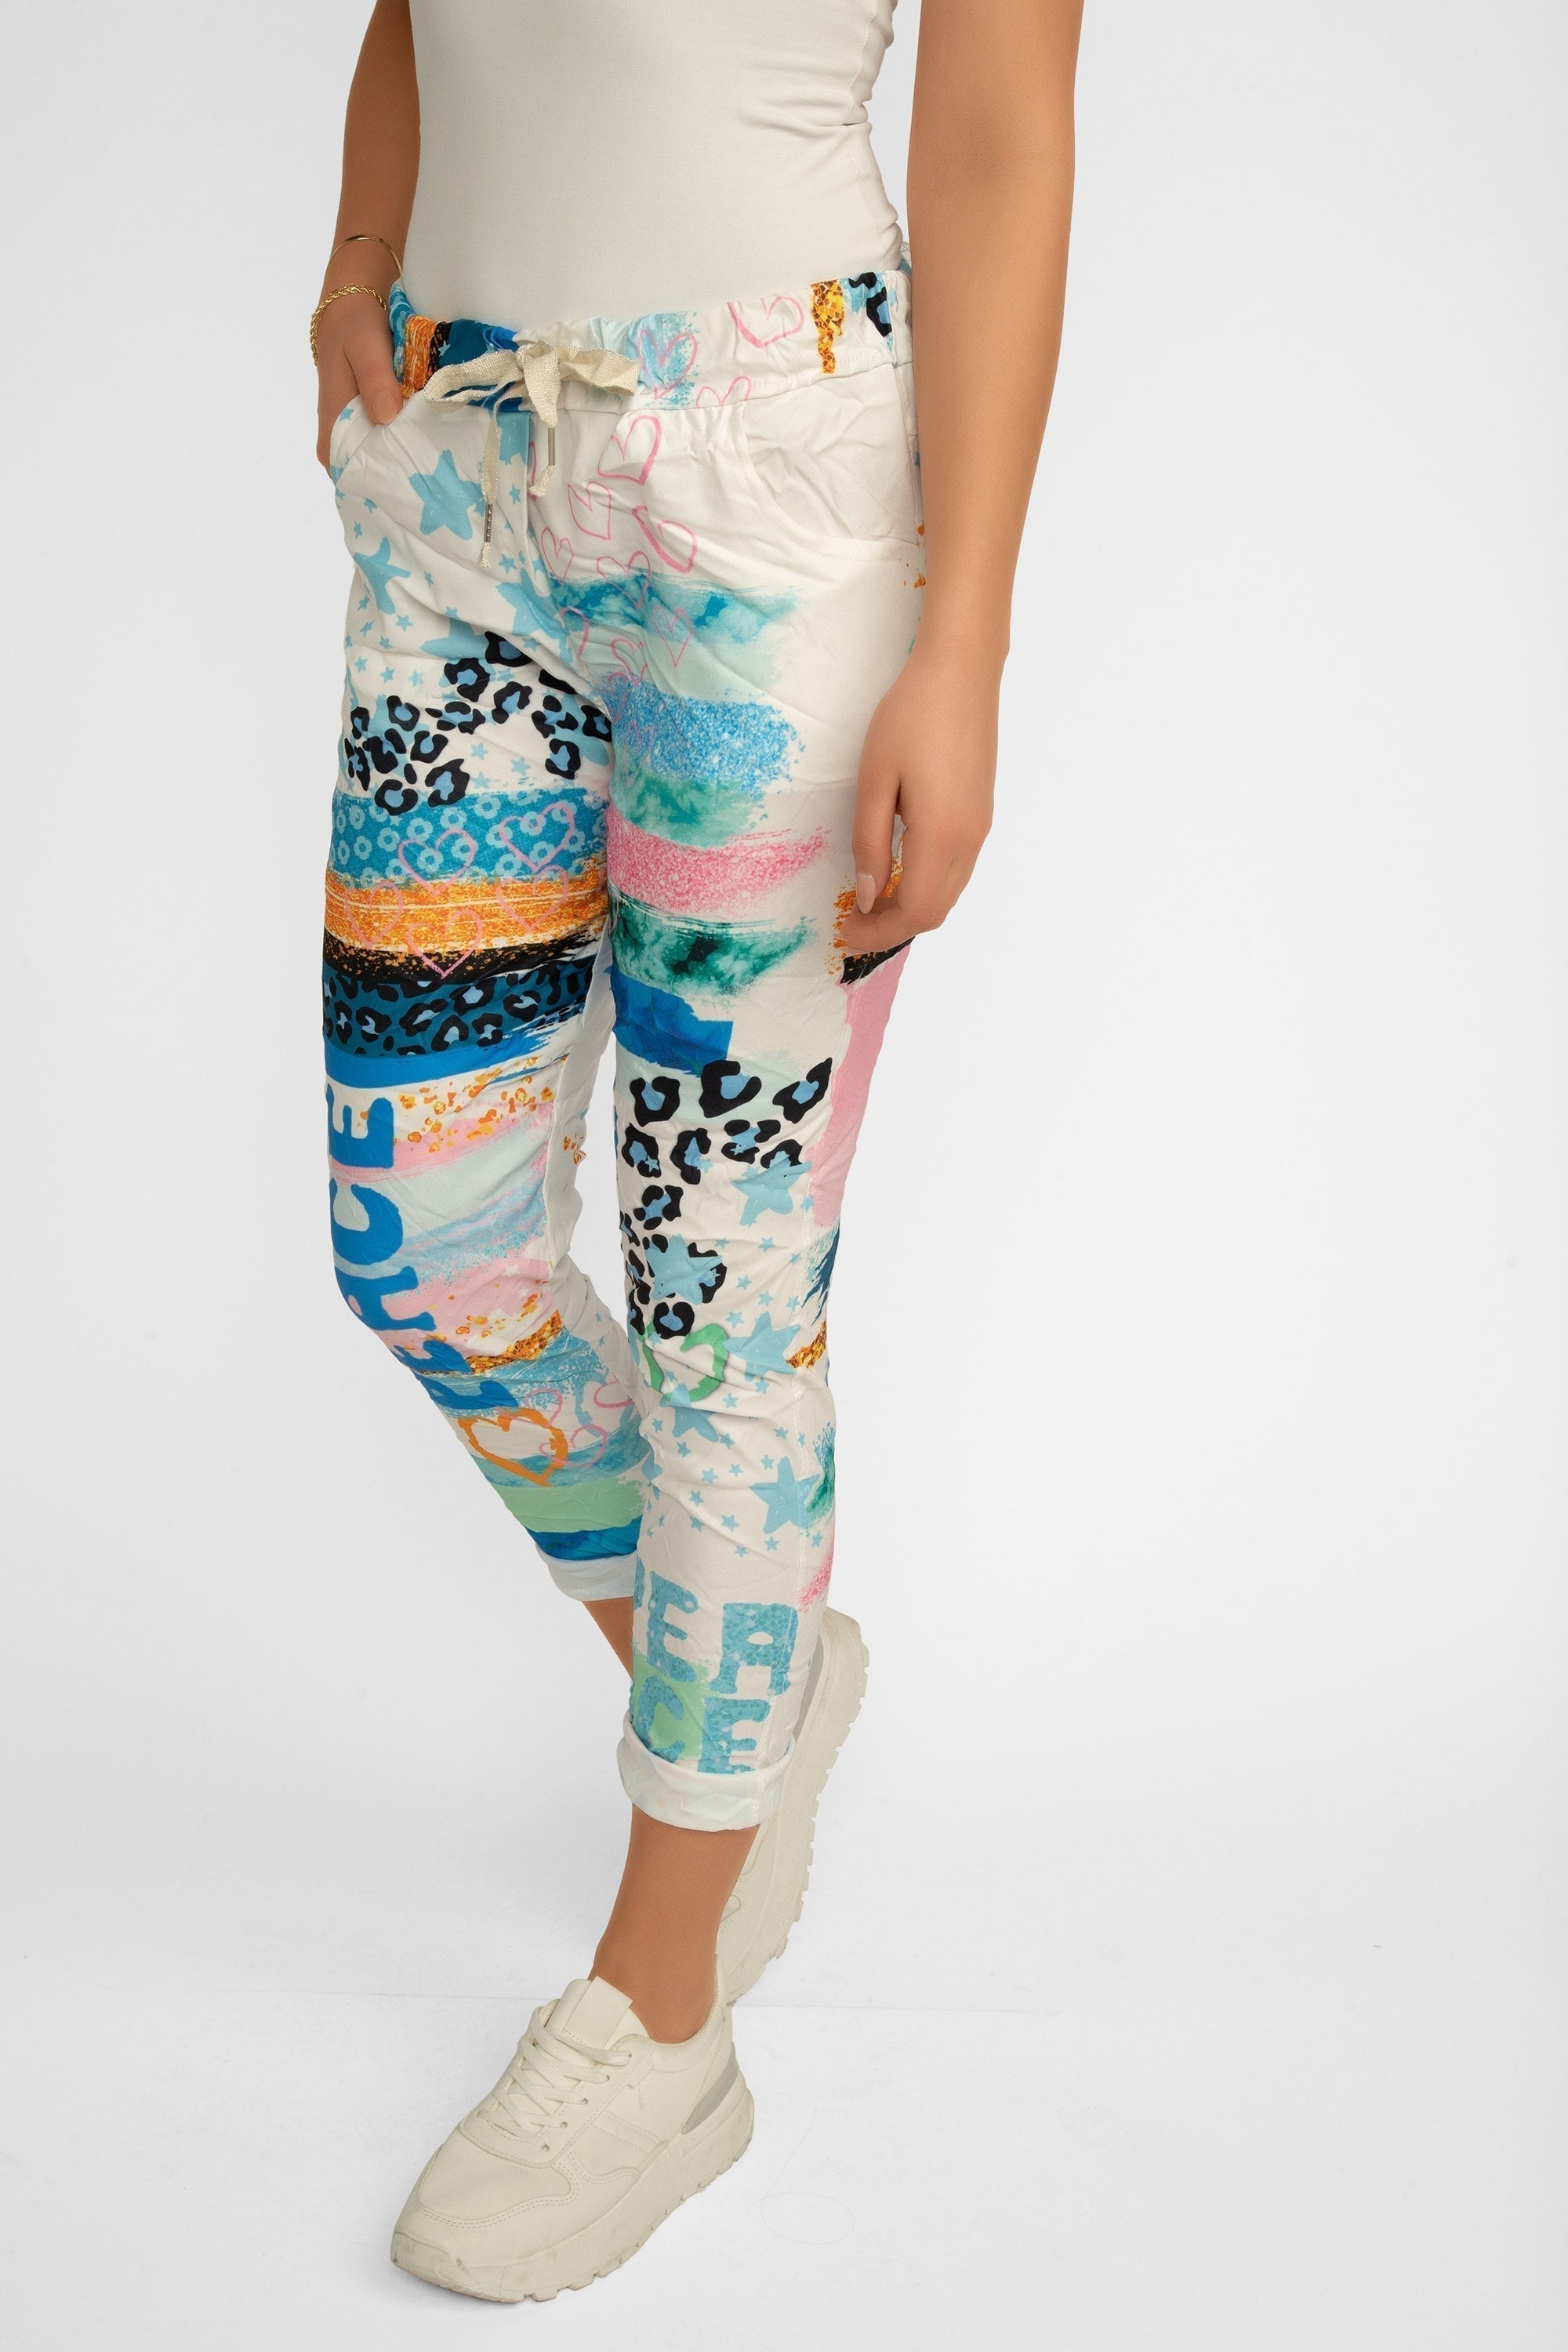 Bella Amore Women's Cropped Multi Print Pull-On Pants in a Blue and multi-coloured patchwork print